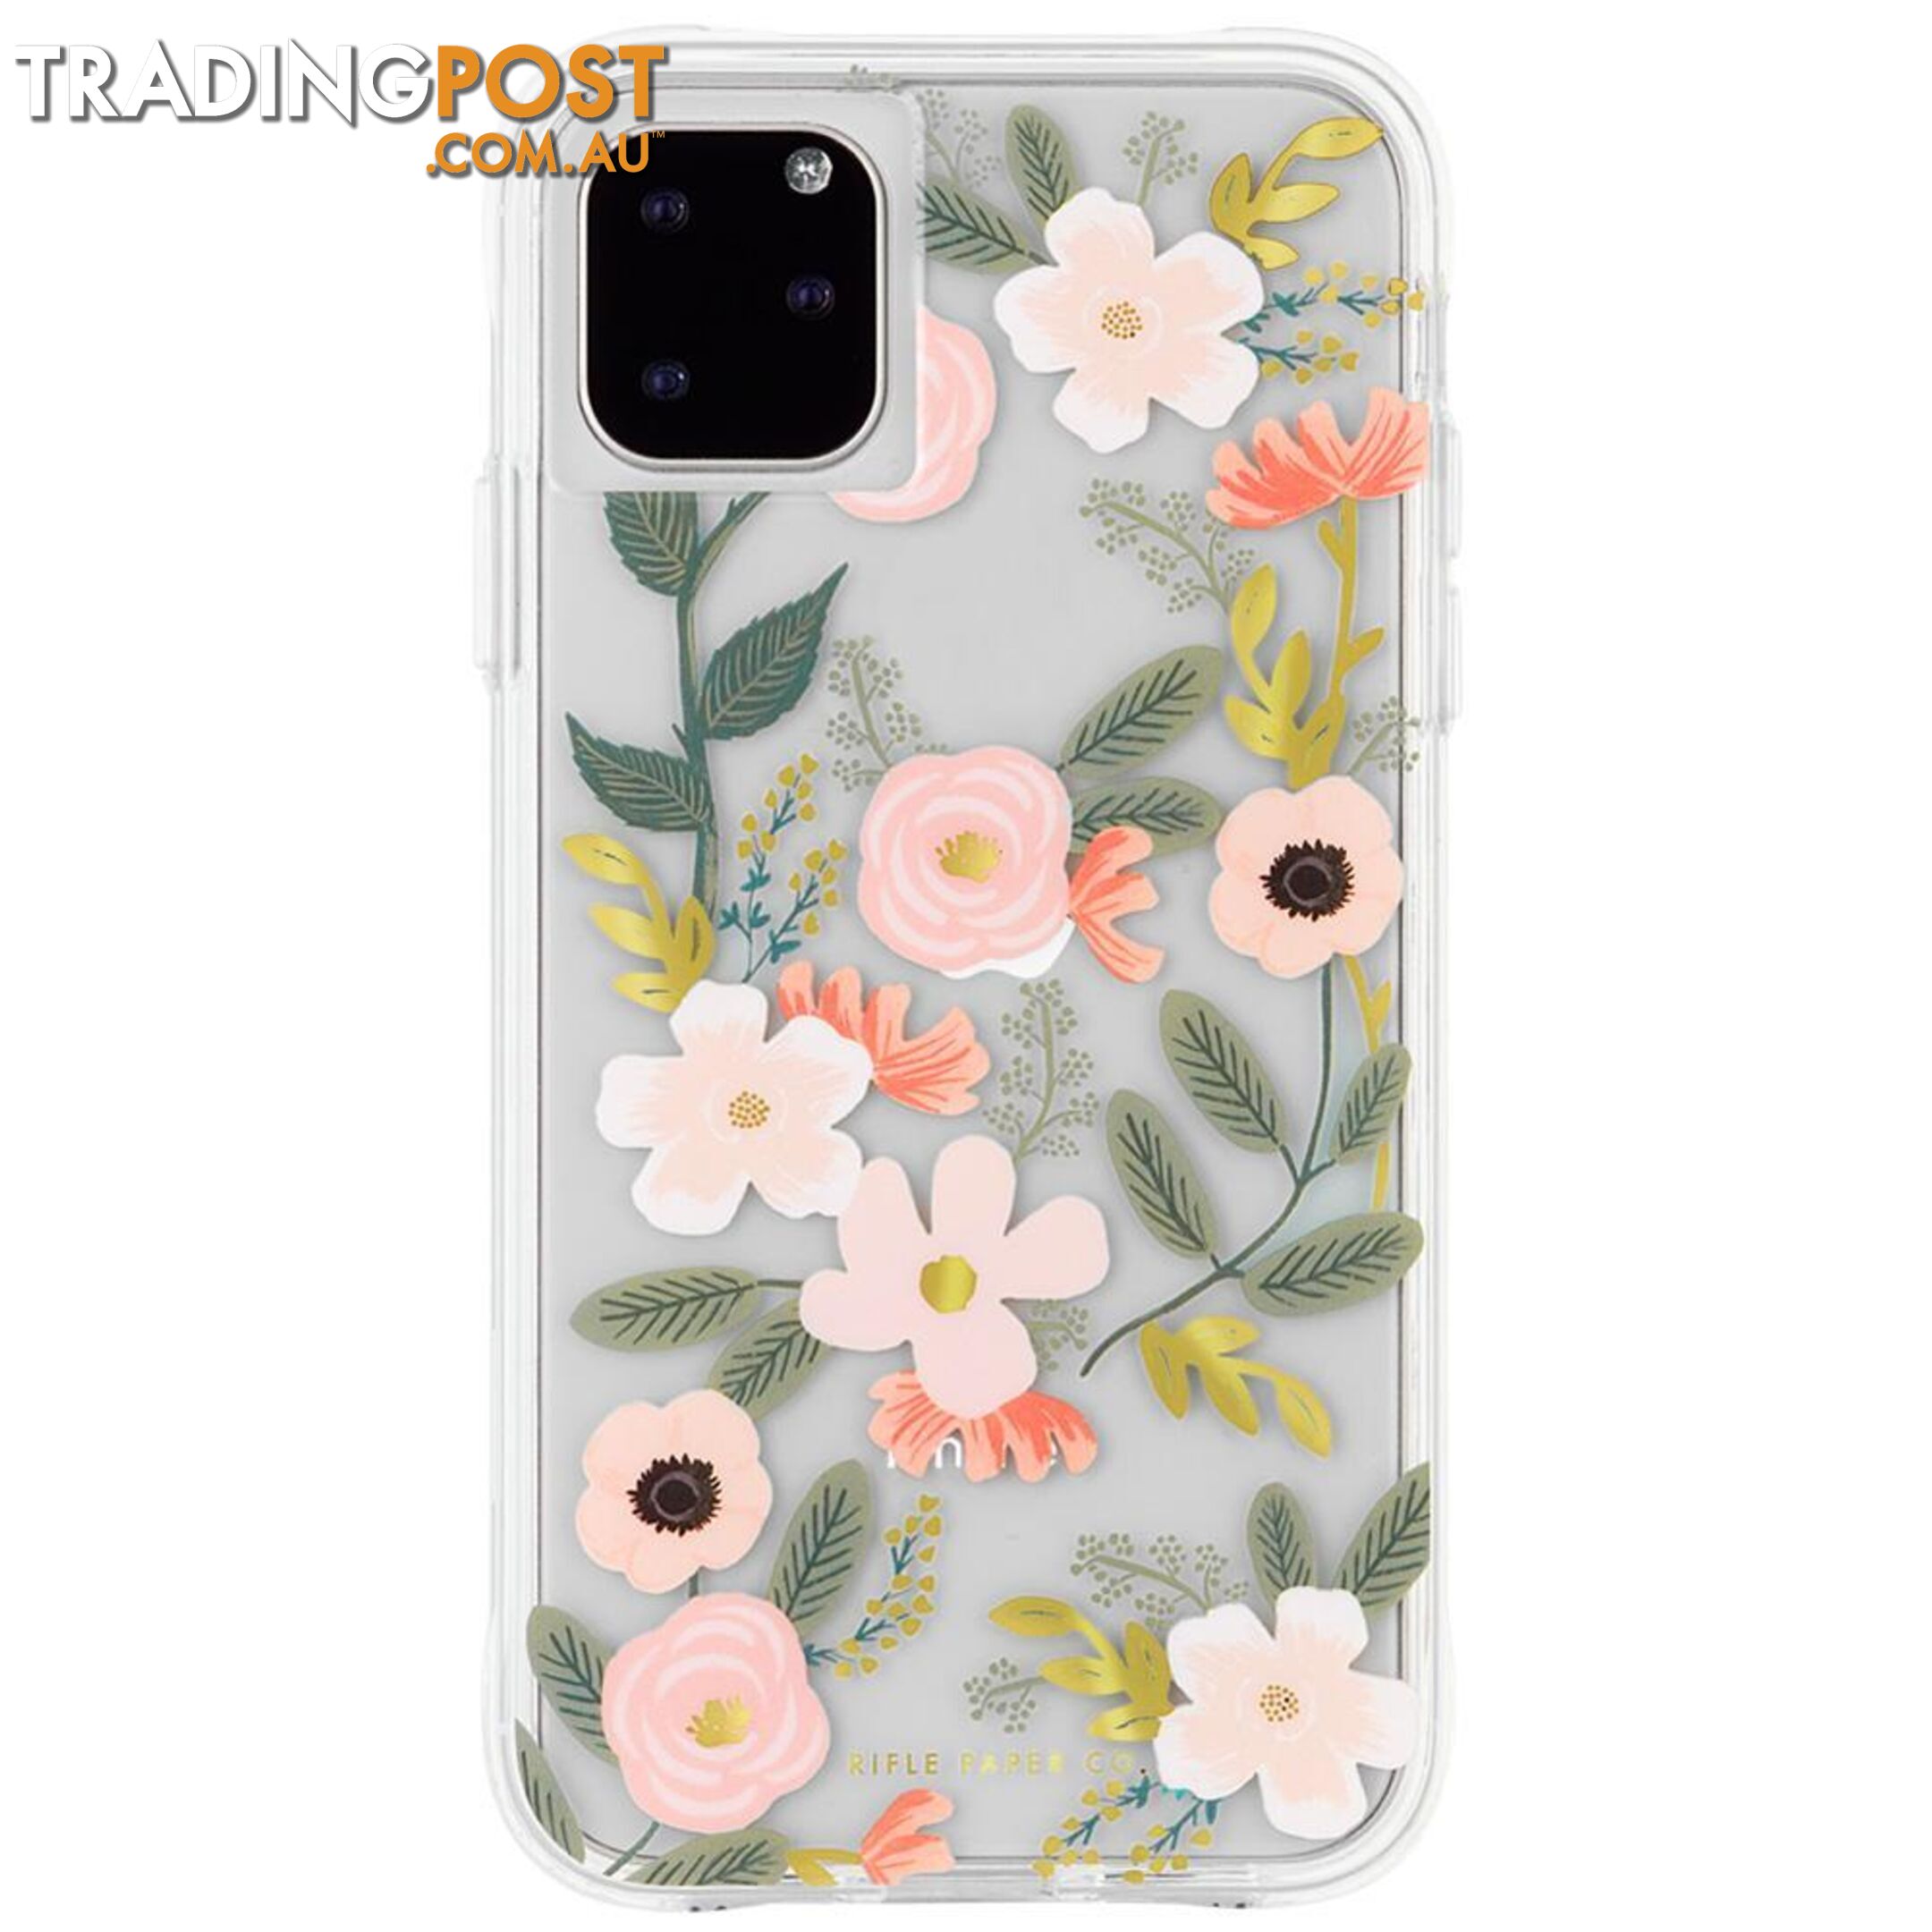 Case-Mate Rifle Paper Case For iPhone 11 Pro - Case-Mate - Gorgeous Girl - 846127187671